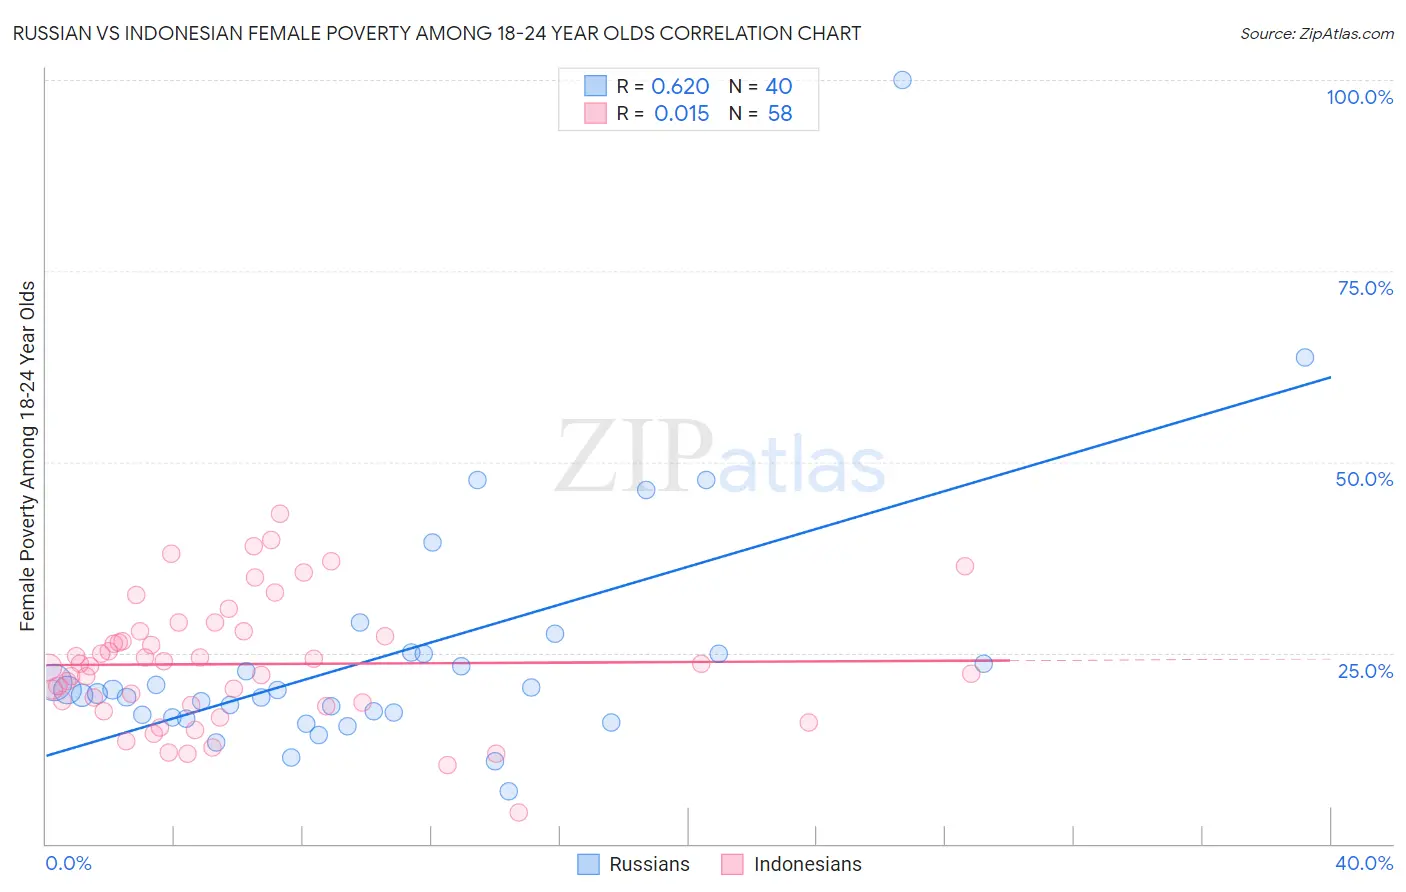 Russian vs Indonesian Female Poverty Among 18-24 Year Olds